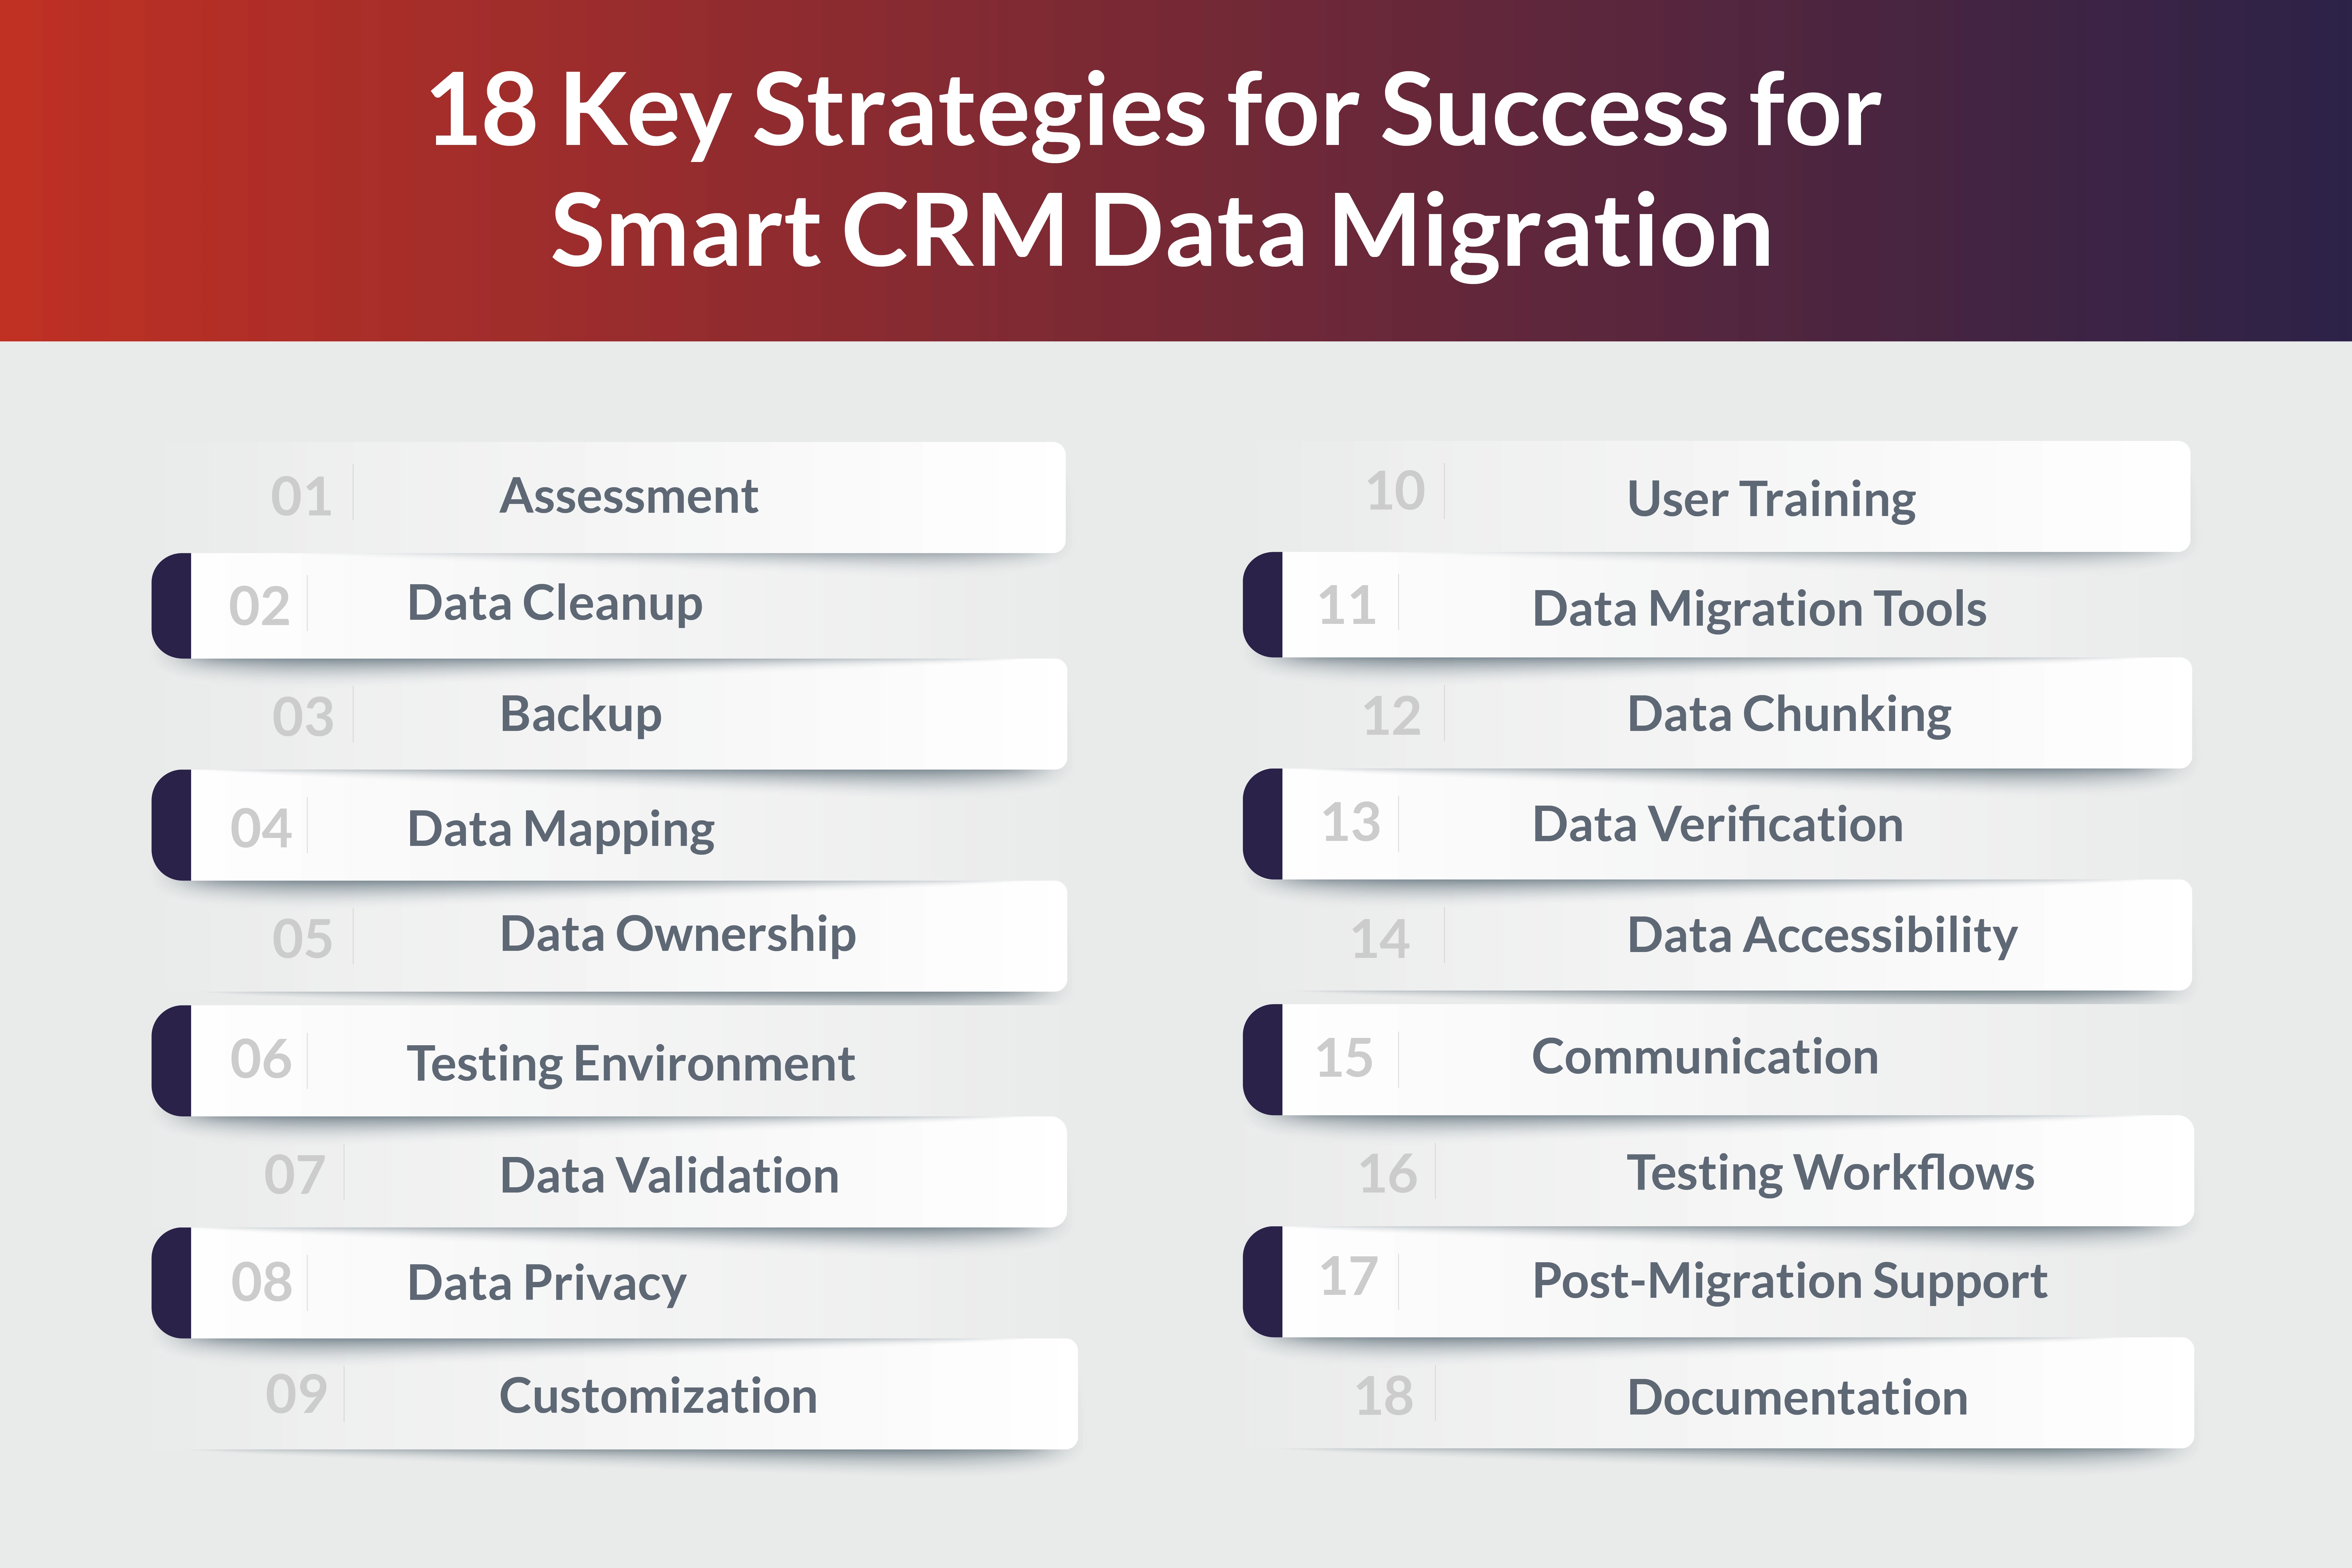 18 Key Strategies for Success for Smart CRM Data Migration